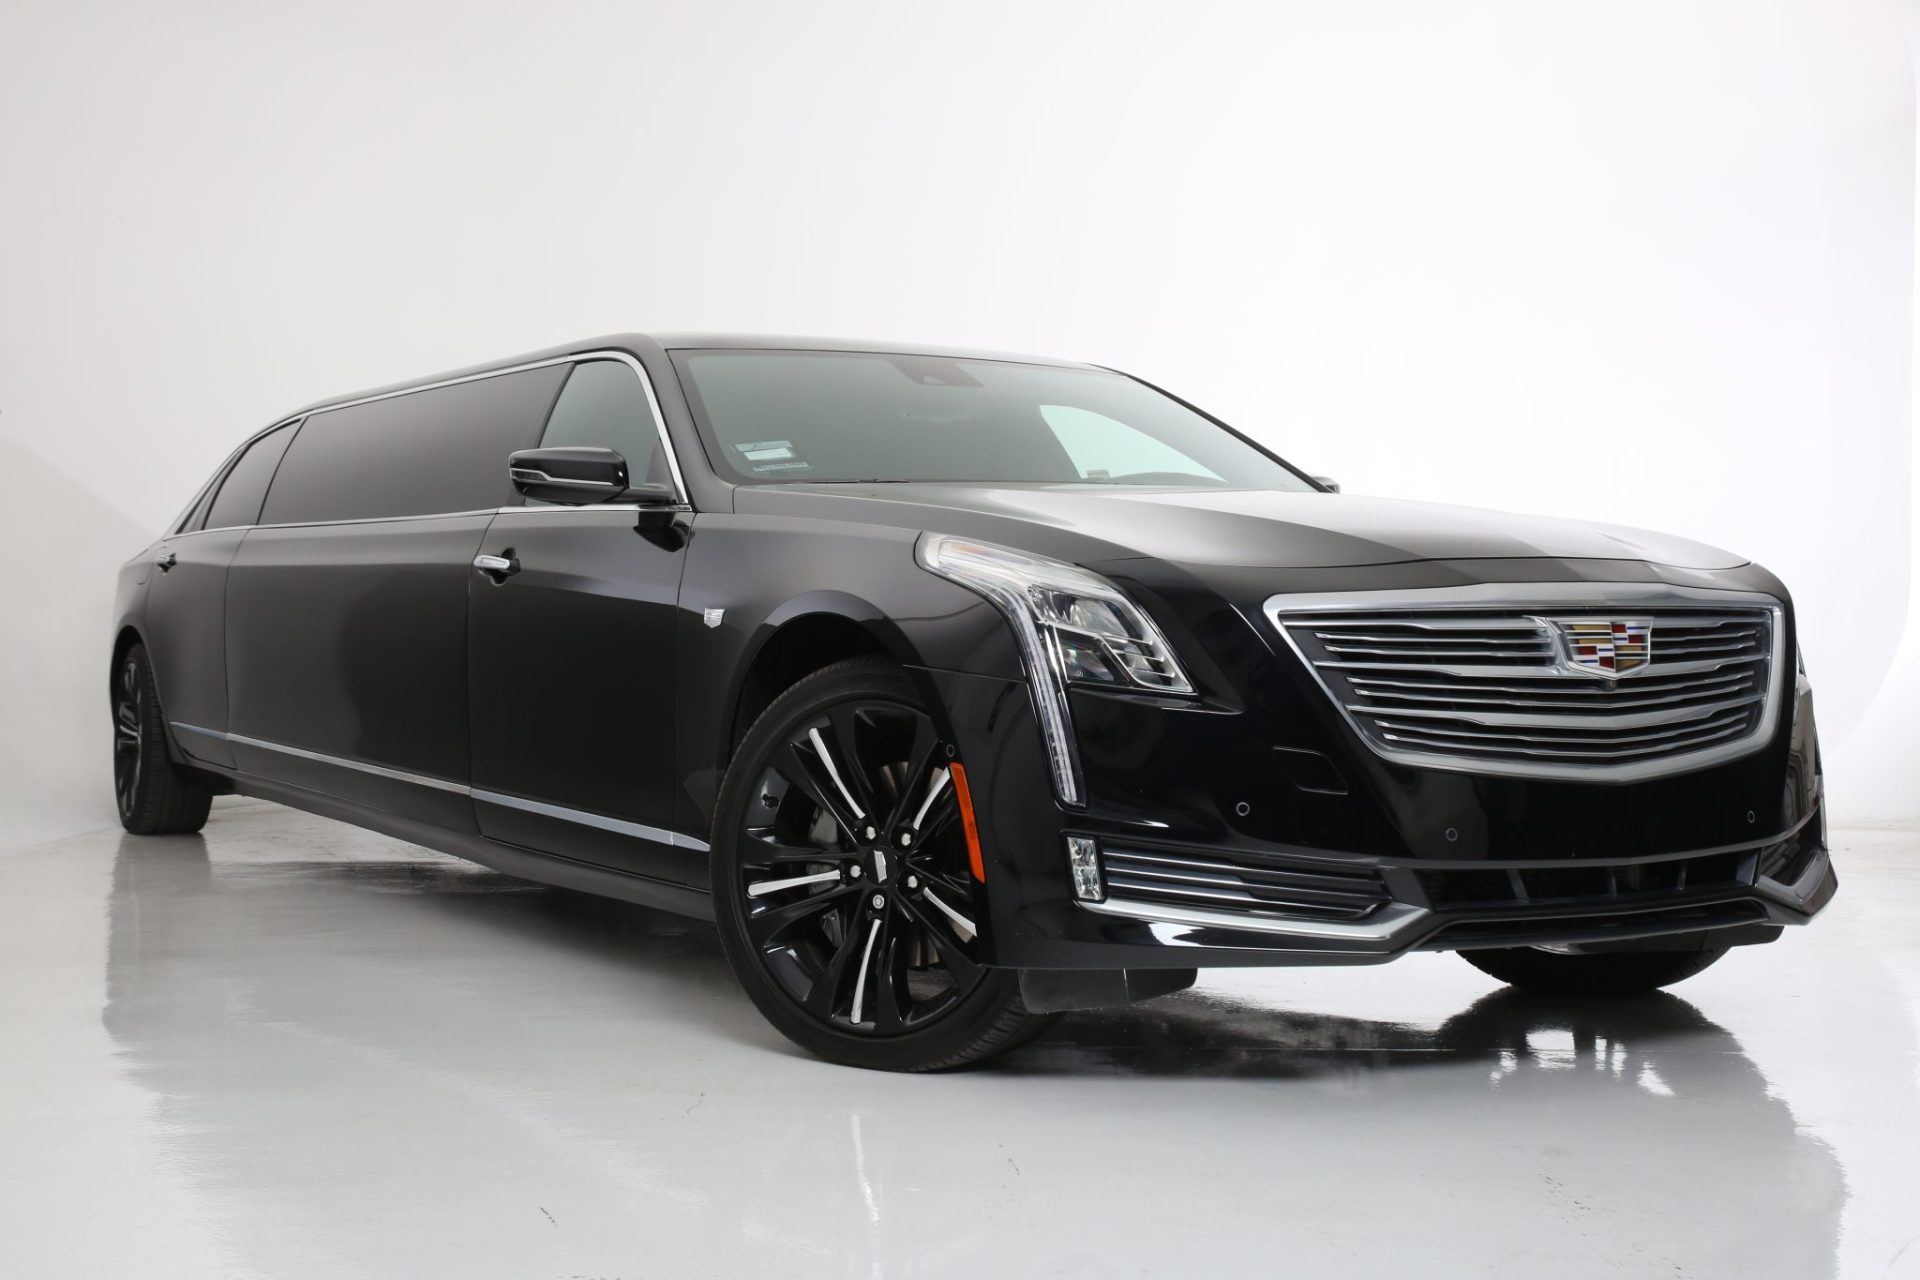 Cadillac CT6-V Stretched Limousine - Exterior Photo #1